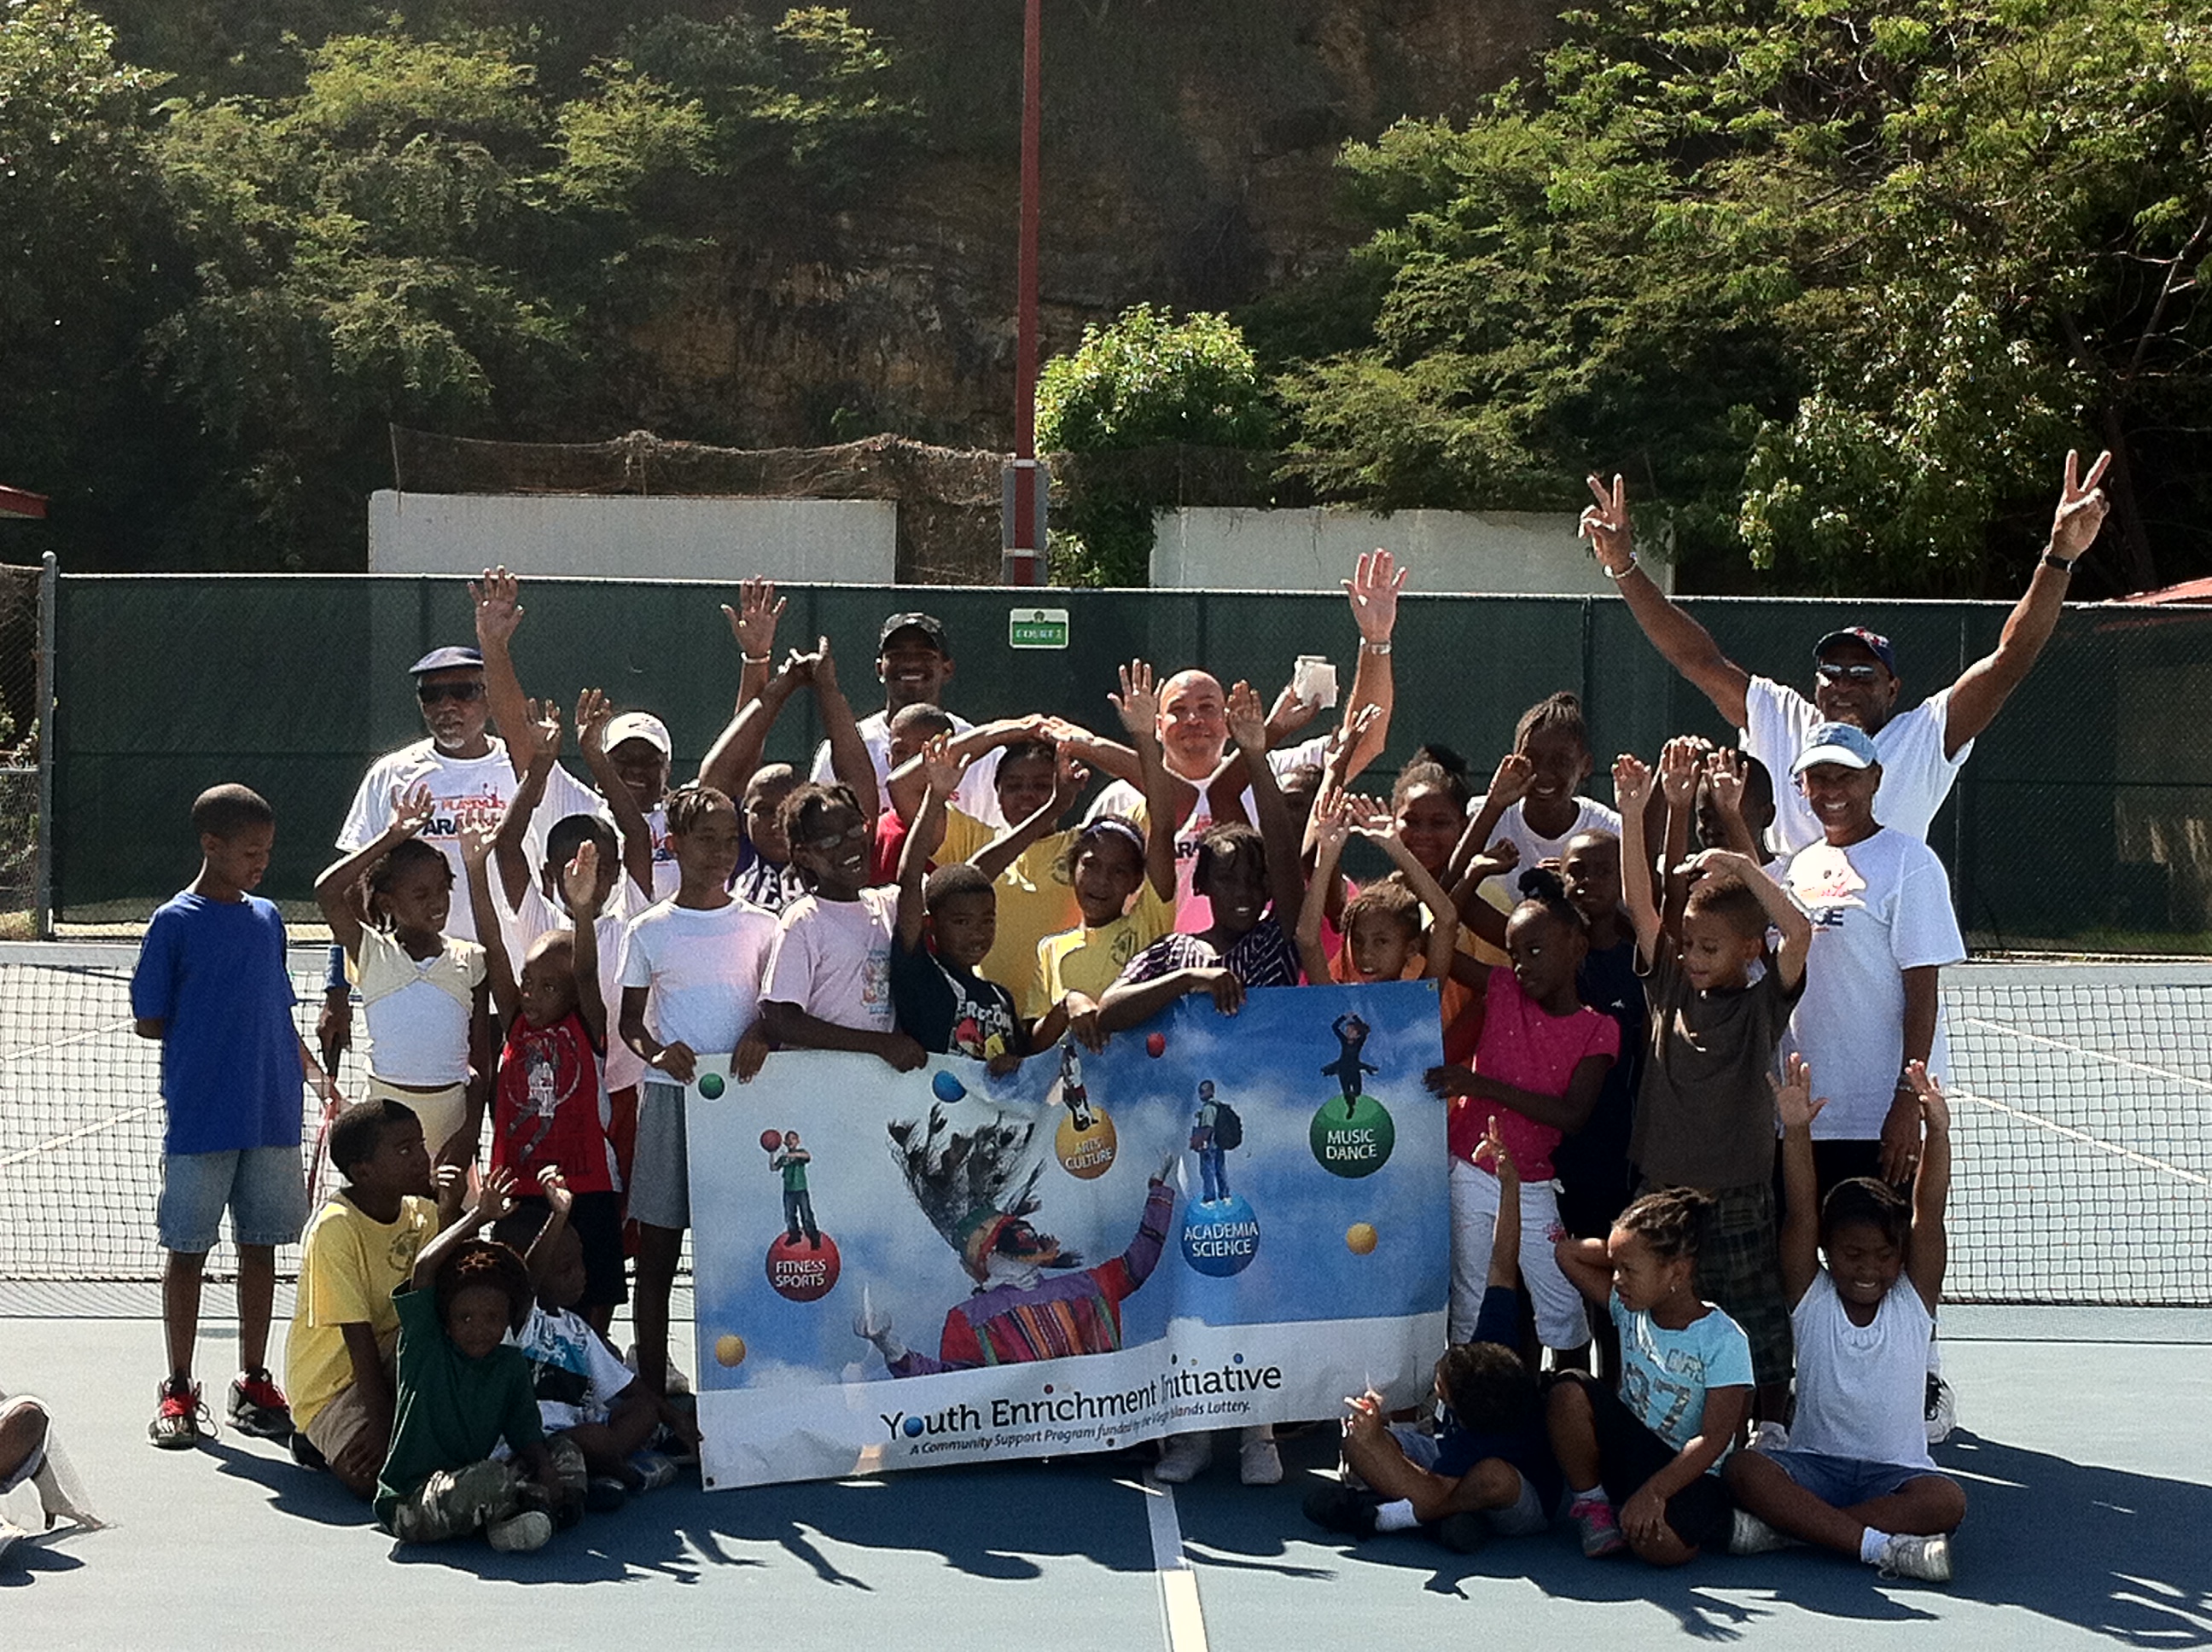 Play Days in Paradise introduces youth to tennis